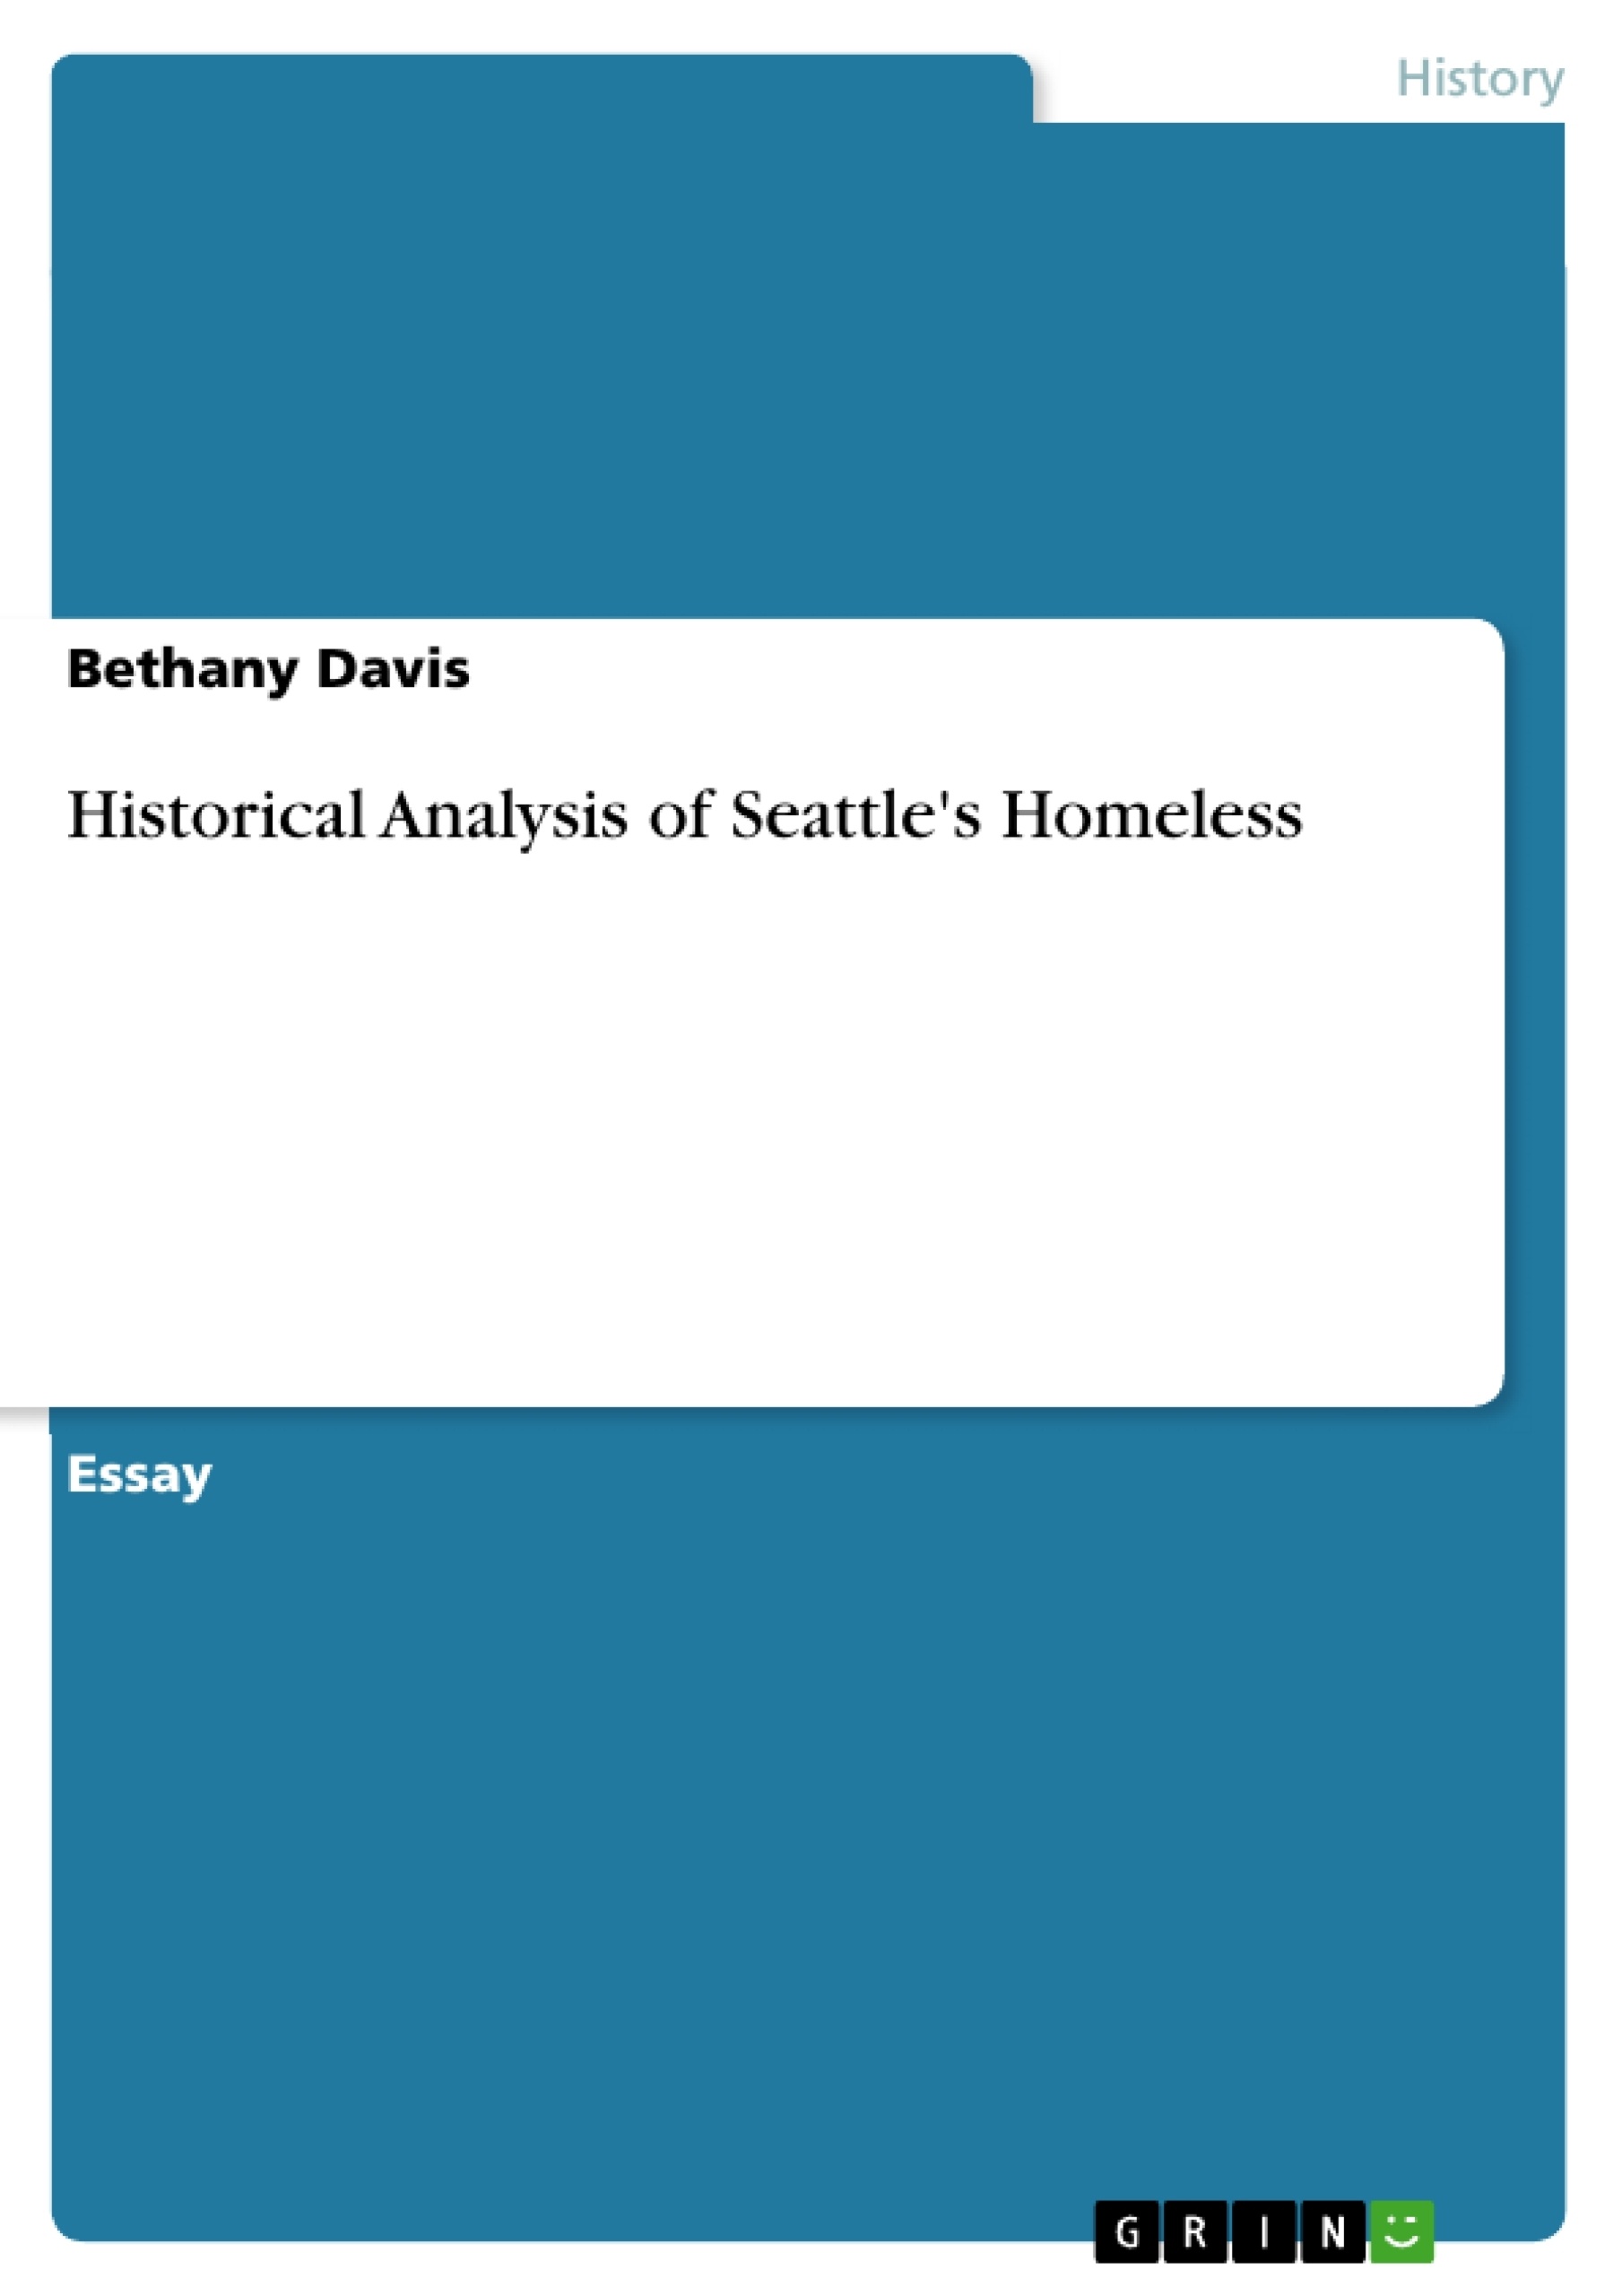 Title: Historical Analysis of Seattle's Homeless